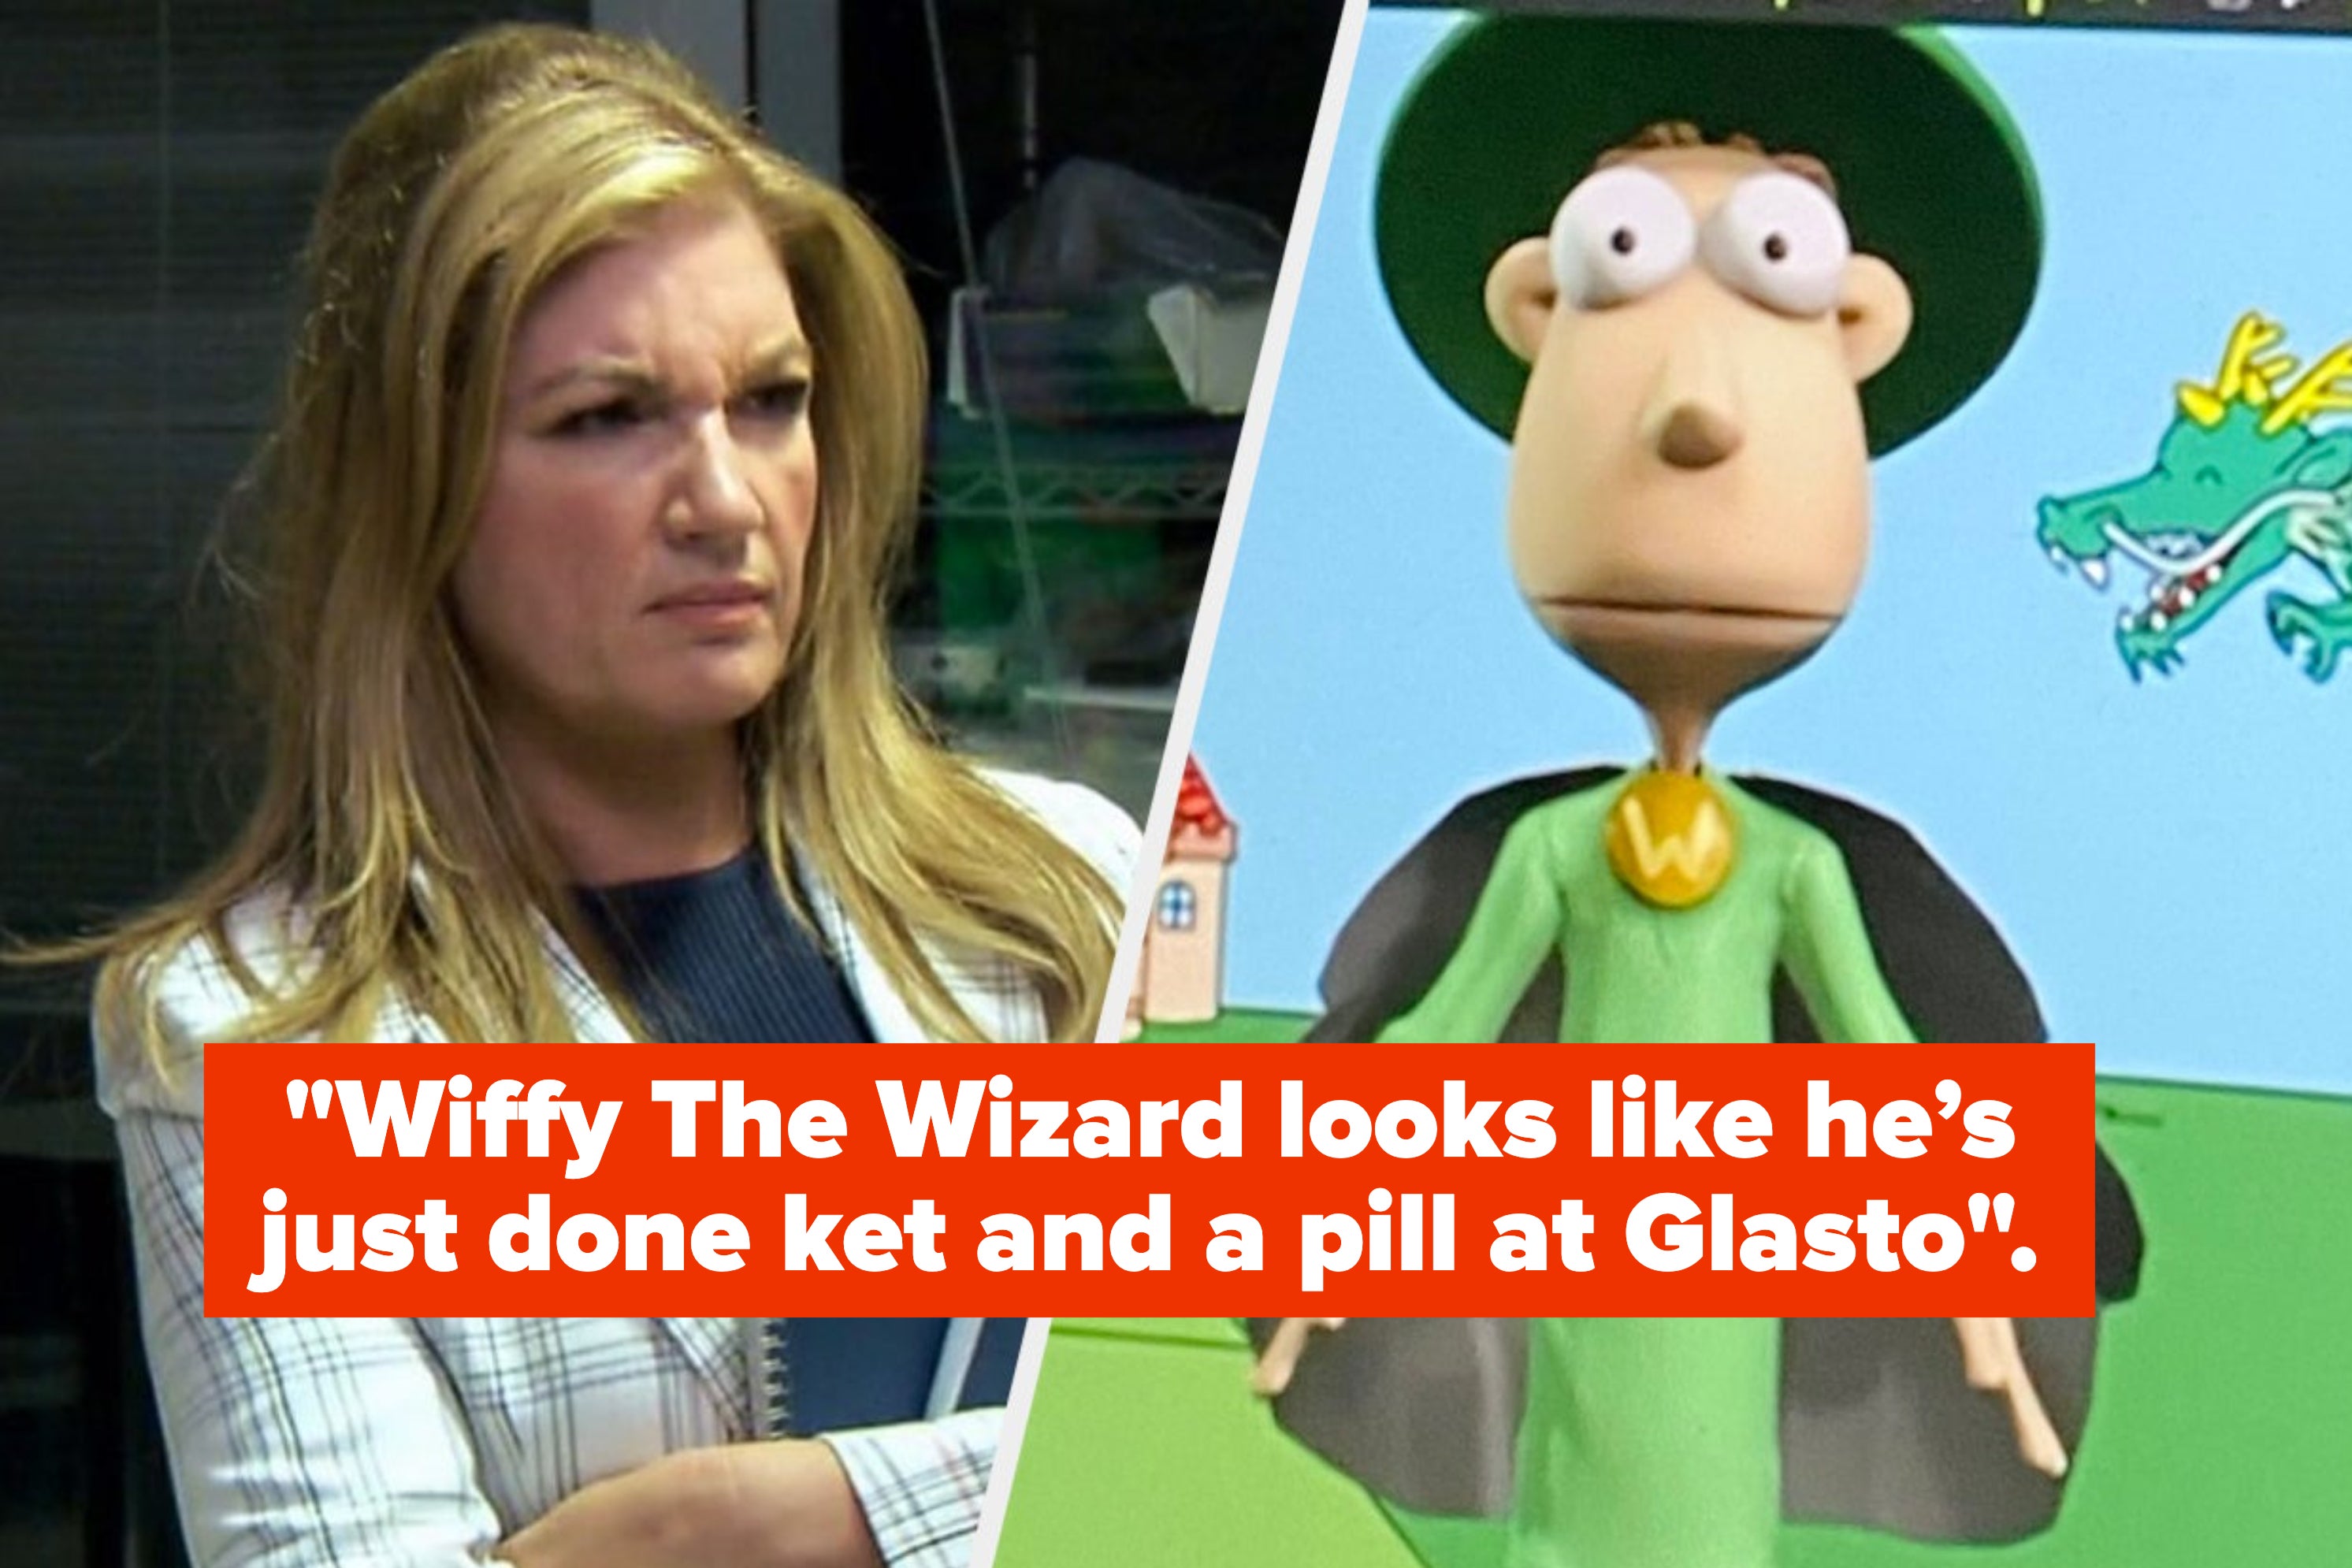 28 Tweets About The Apprentice That Cracked Me Up